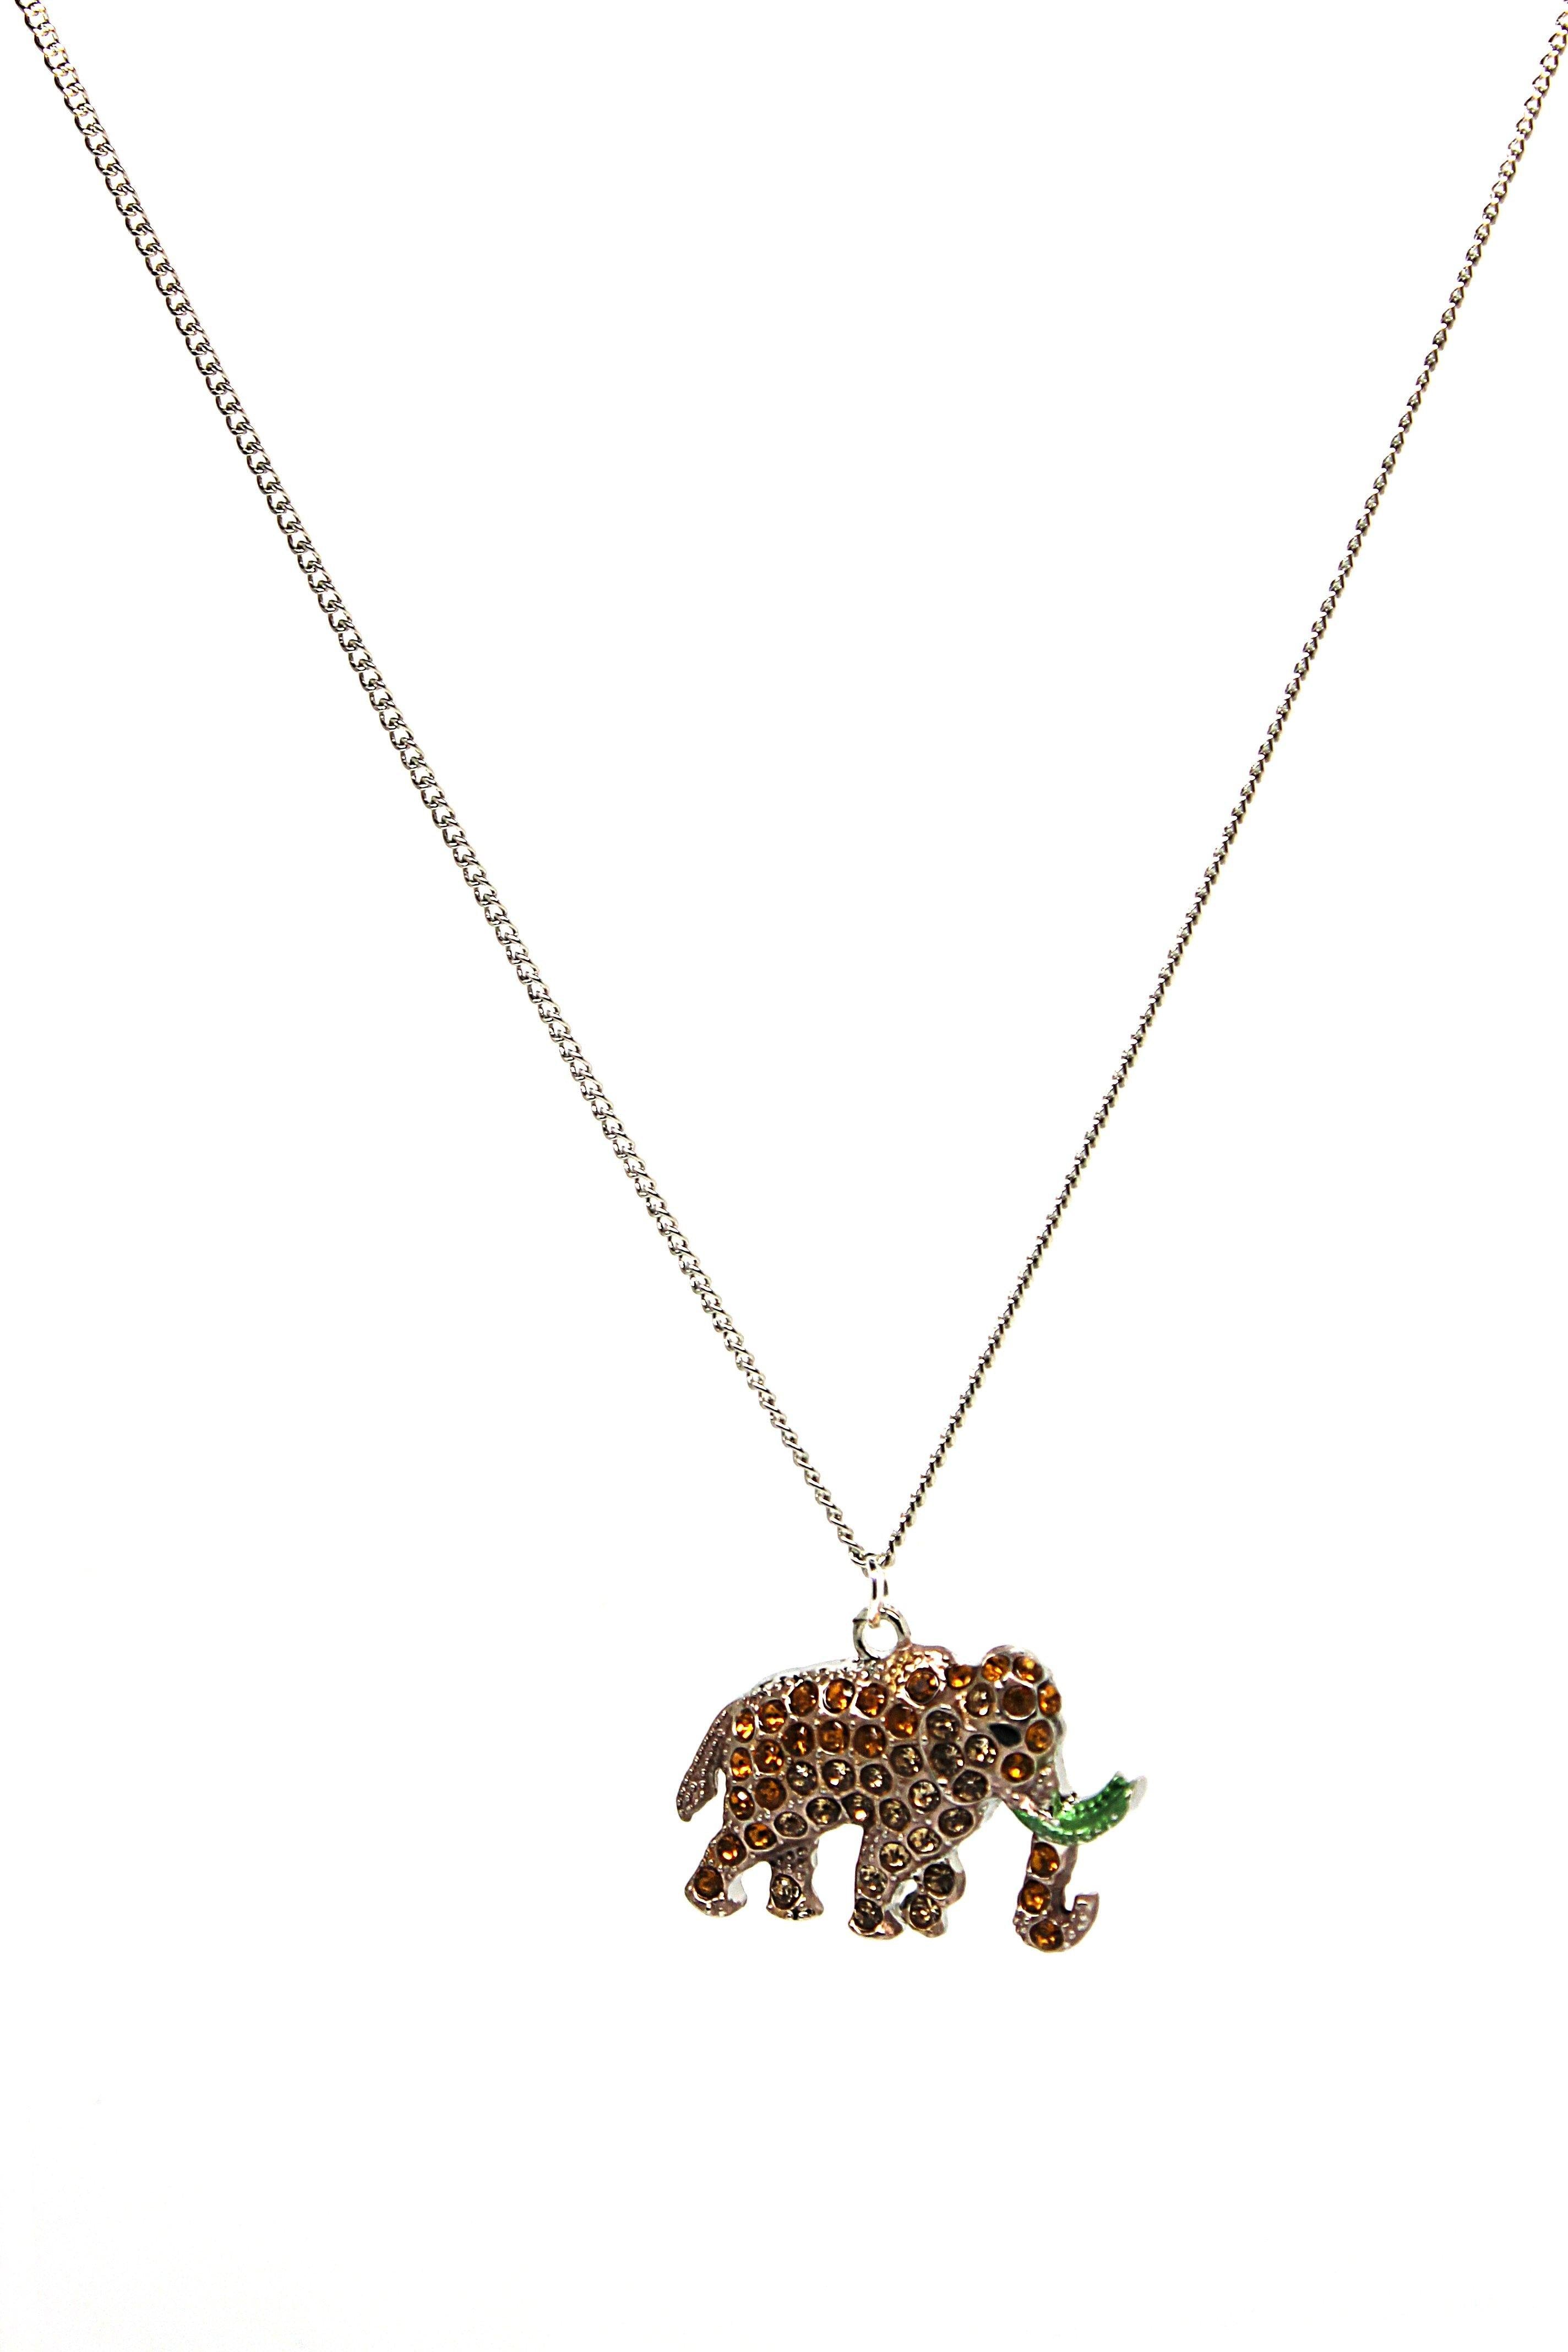 Mammoth Necklace - Wildtouch - Wildtouch